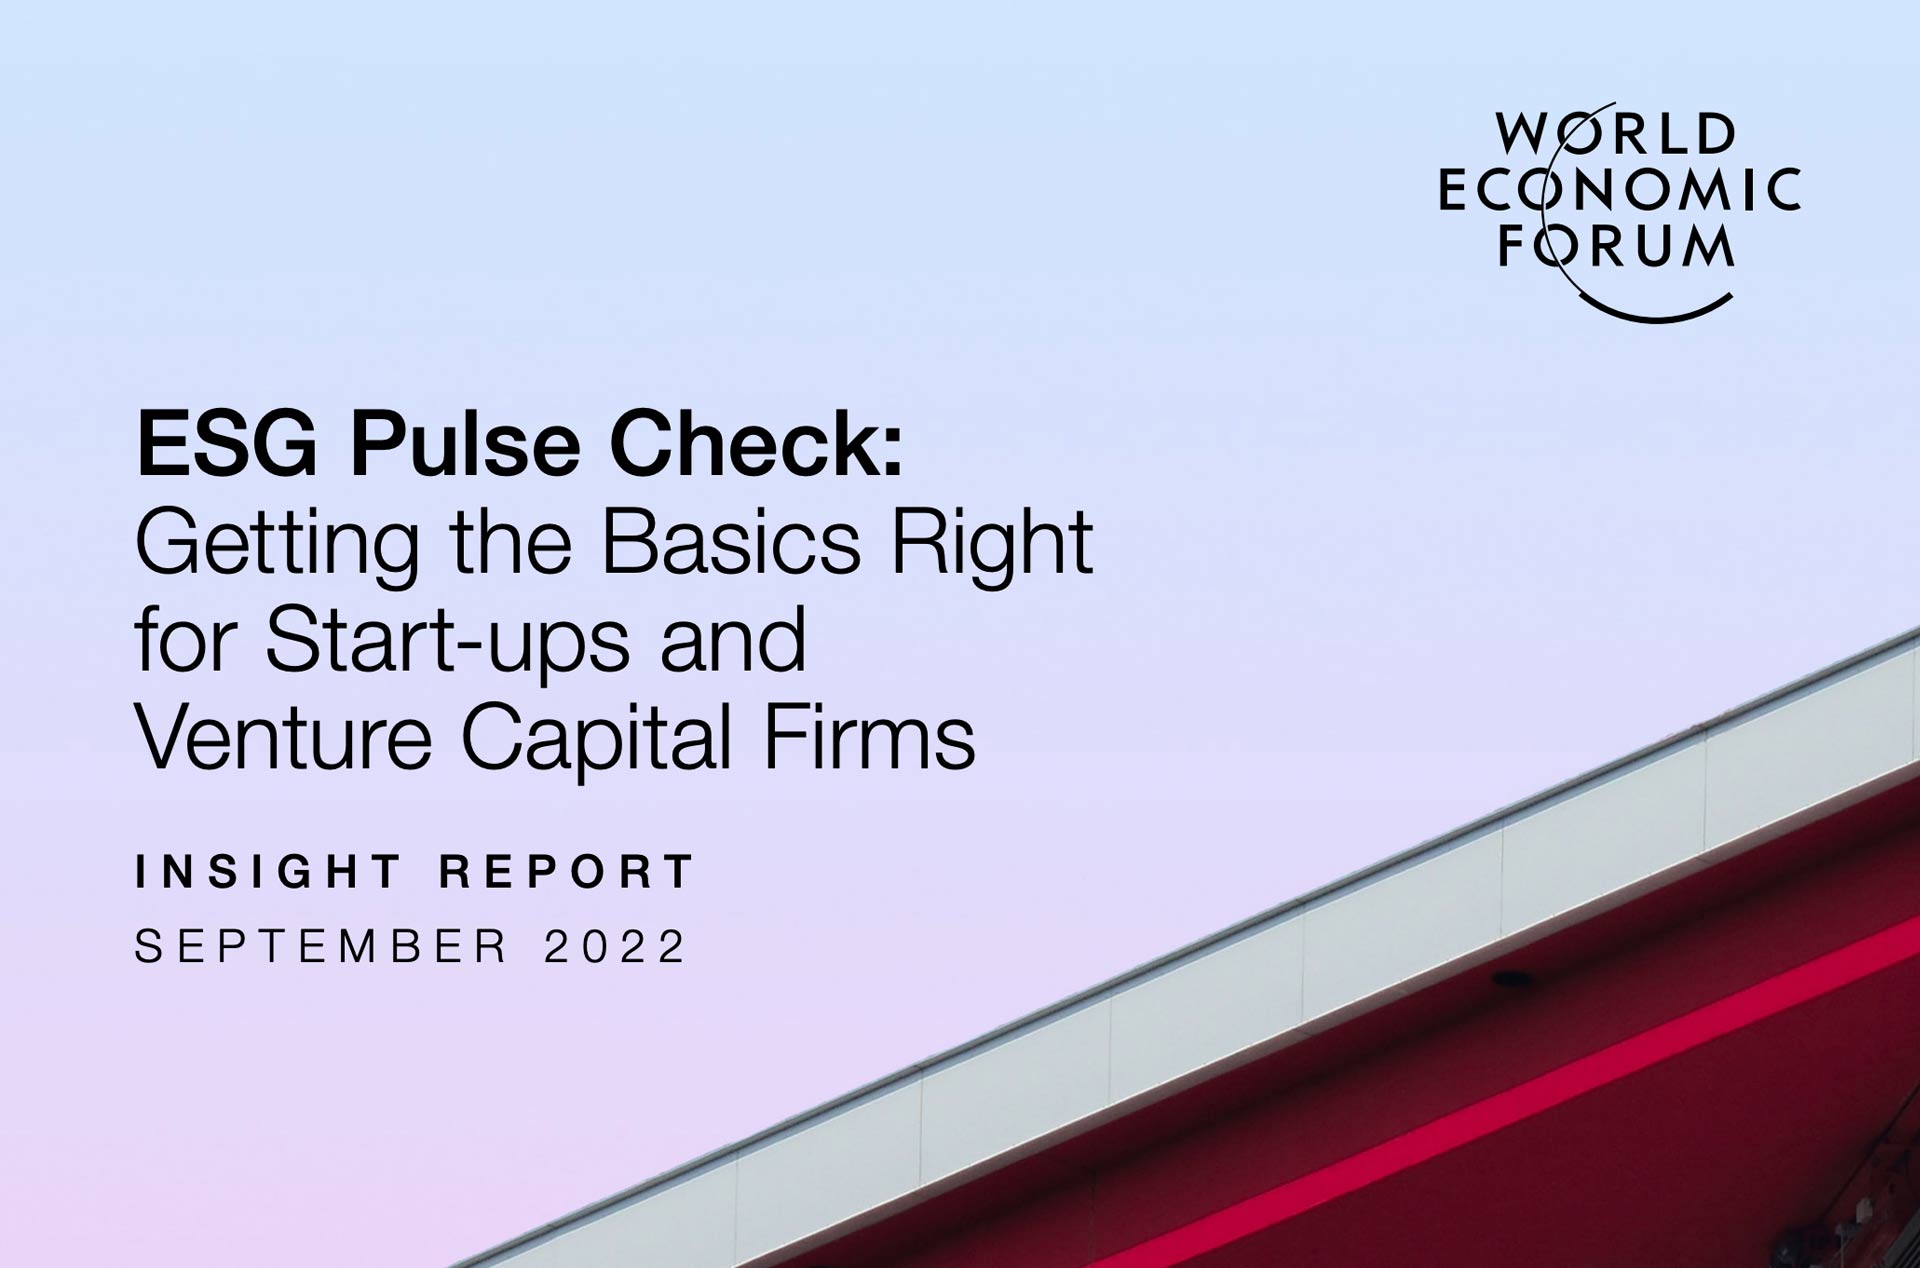 Esg Pulse Check: Getting The Basics Right For Startups And Venture Capital Firms